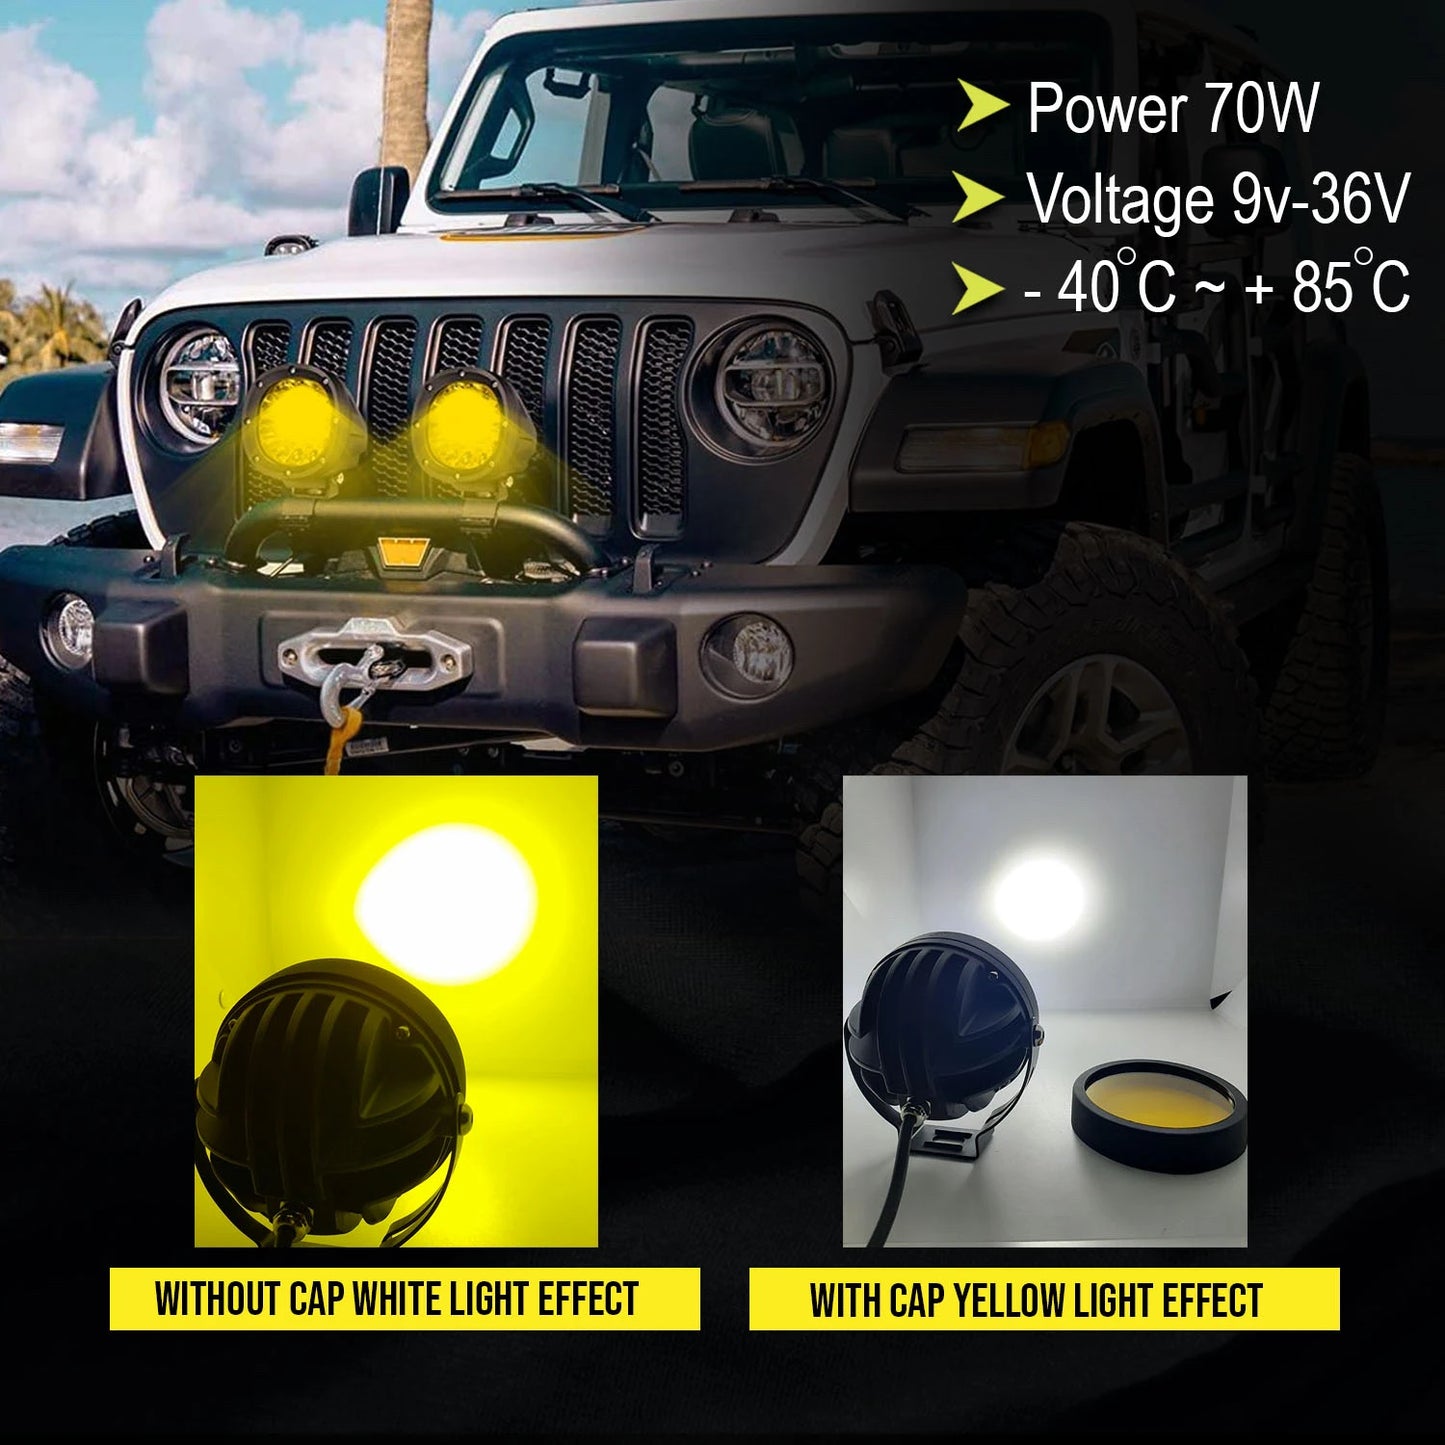 HJG Original 70W CREE 140W Dual Color Yellow/White LED Fog Lights with Wiring Harness Kit light brightness output controller switch Yellow Filter Cap Waterproof Light for Bikes, Cars, Jeeps Yellow Filter Cap